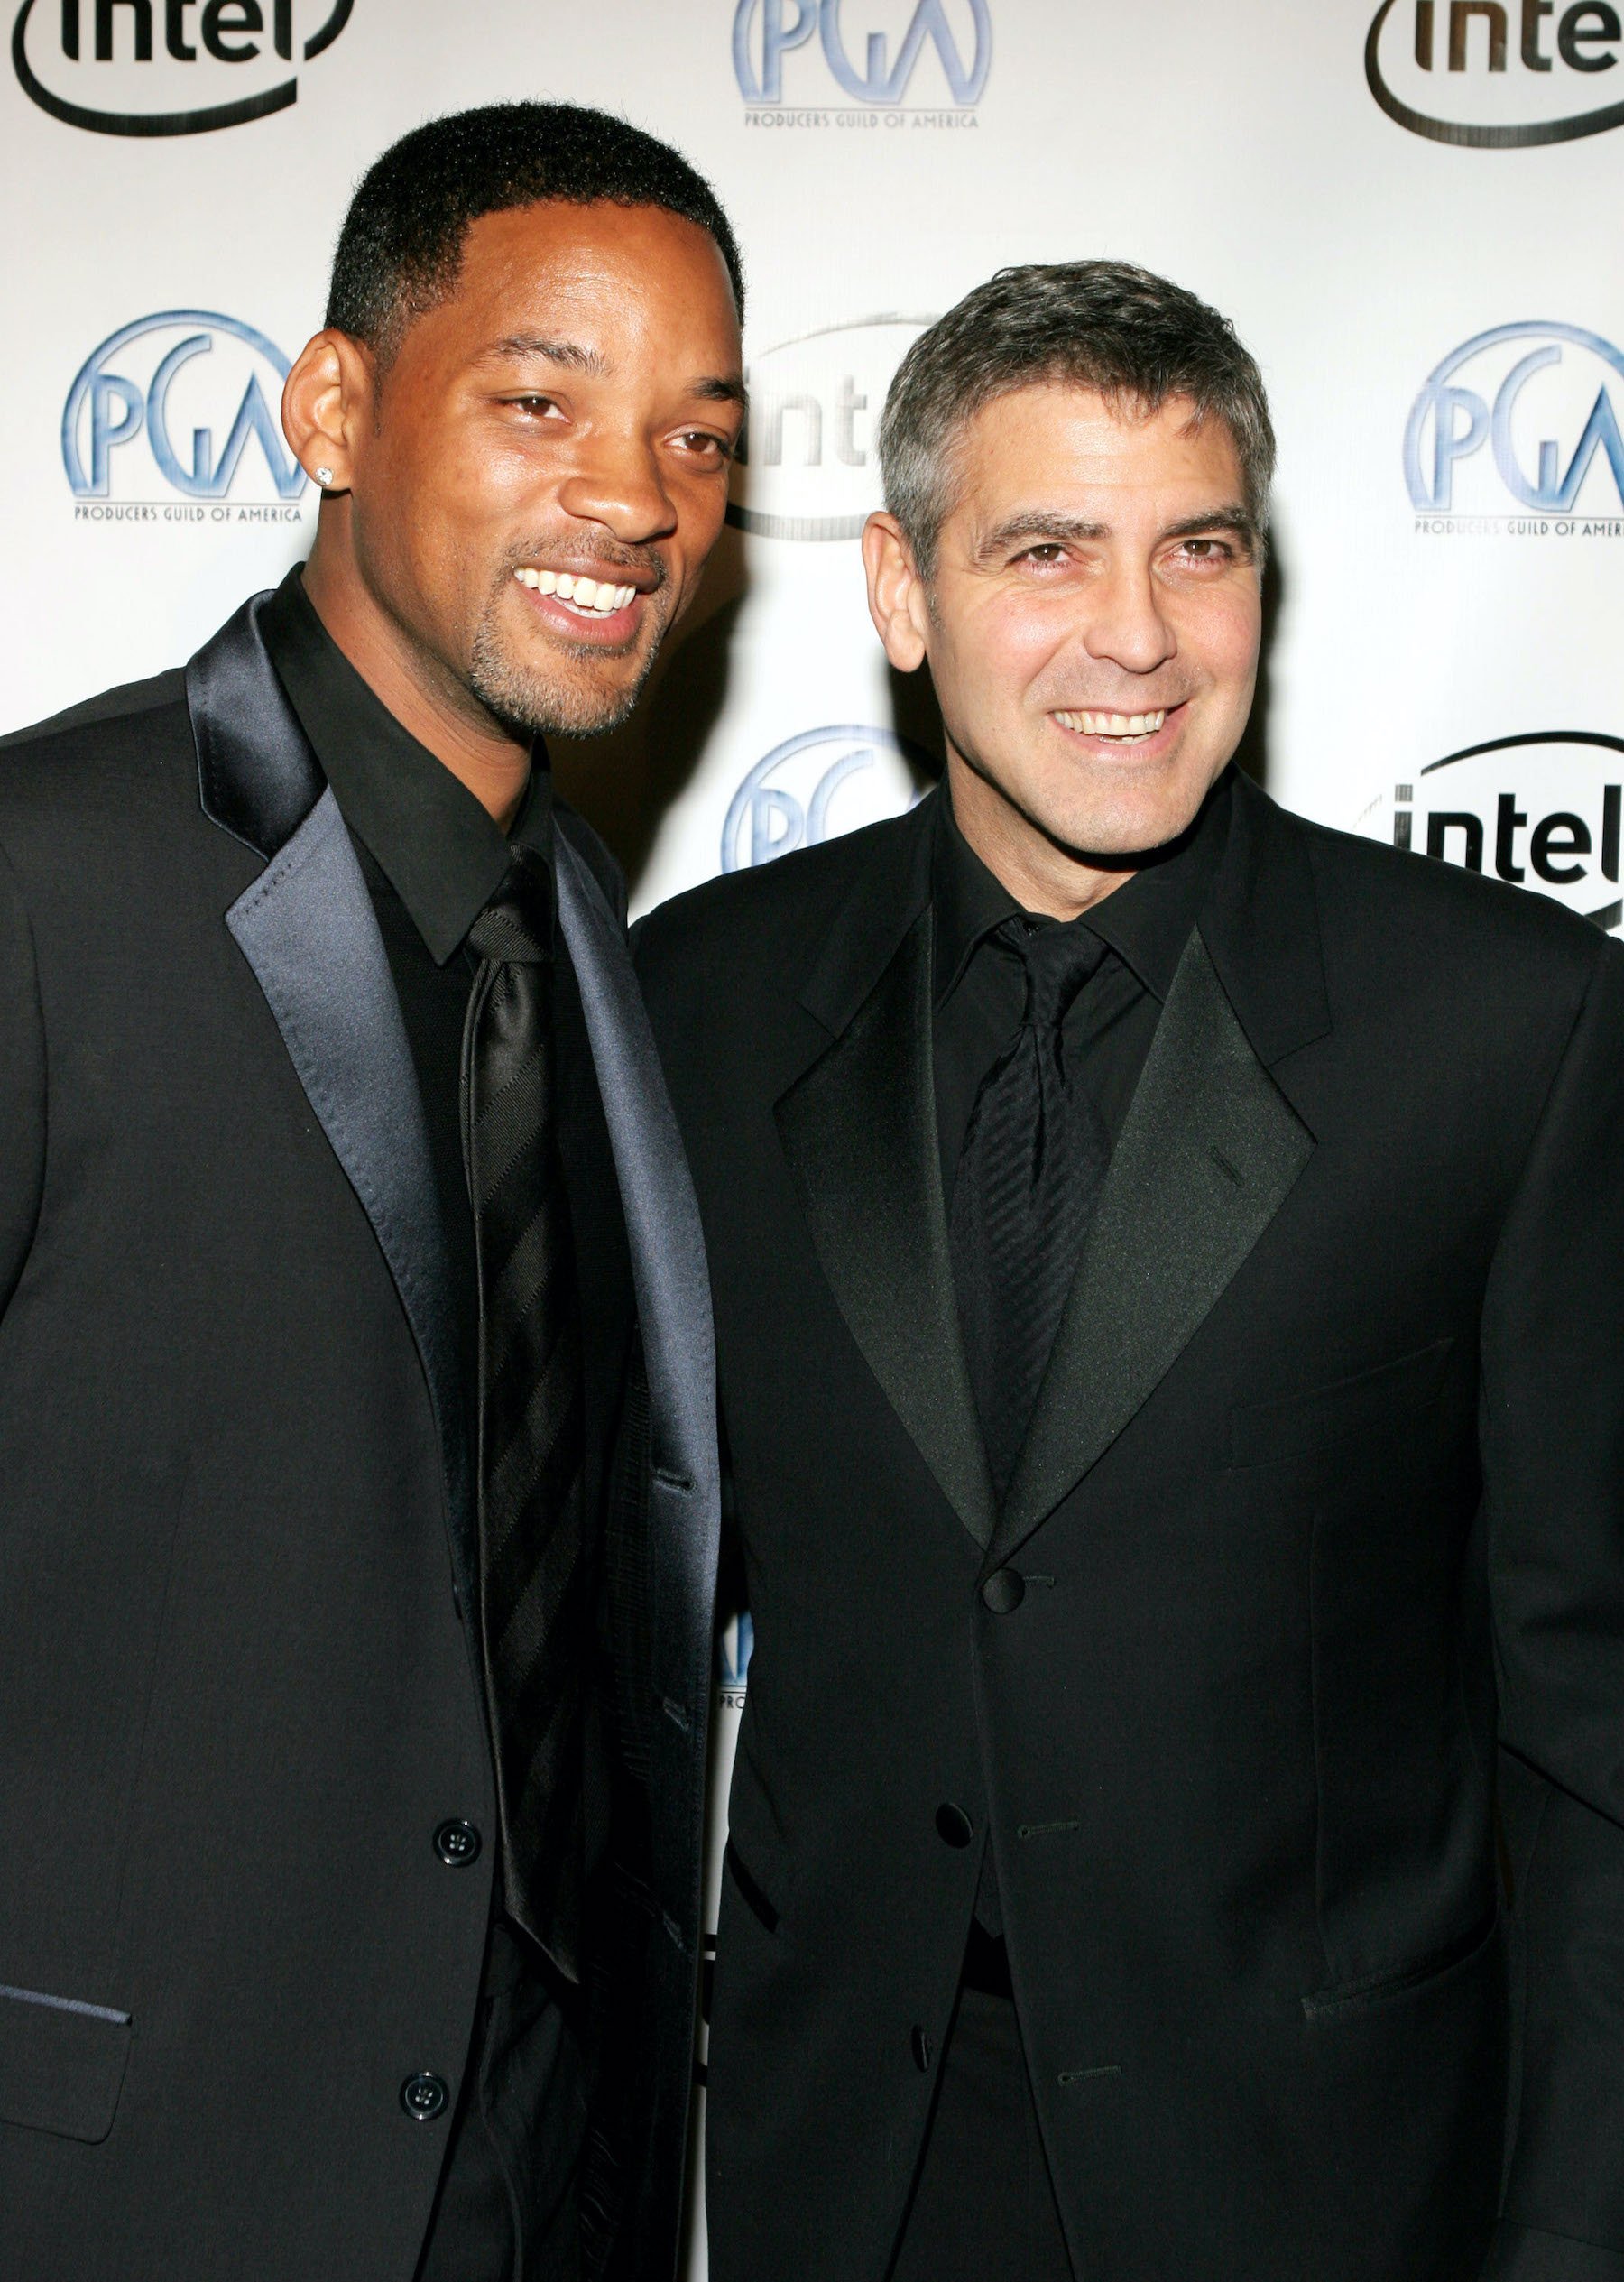 Will Smith and George Clooney at the 2006 Producers Guild Awards